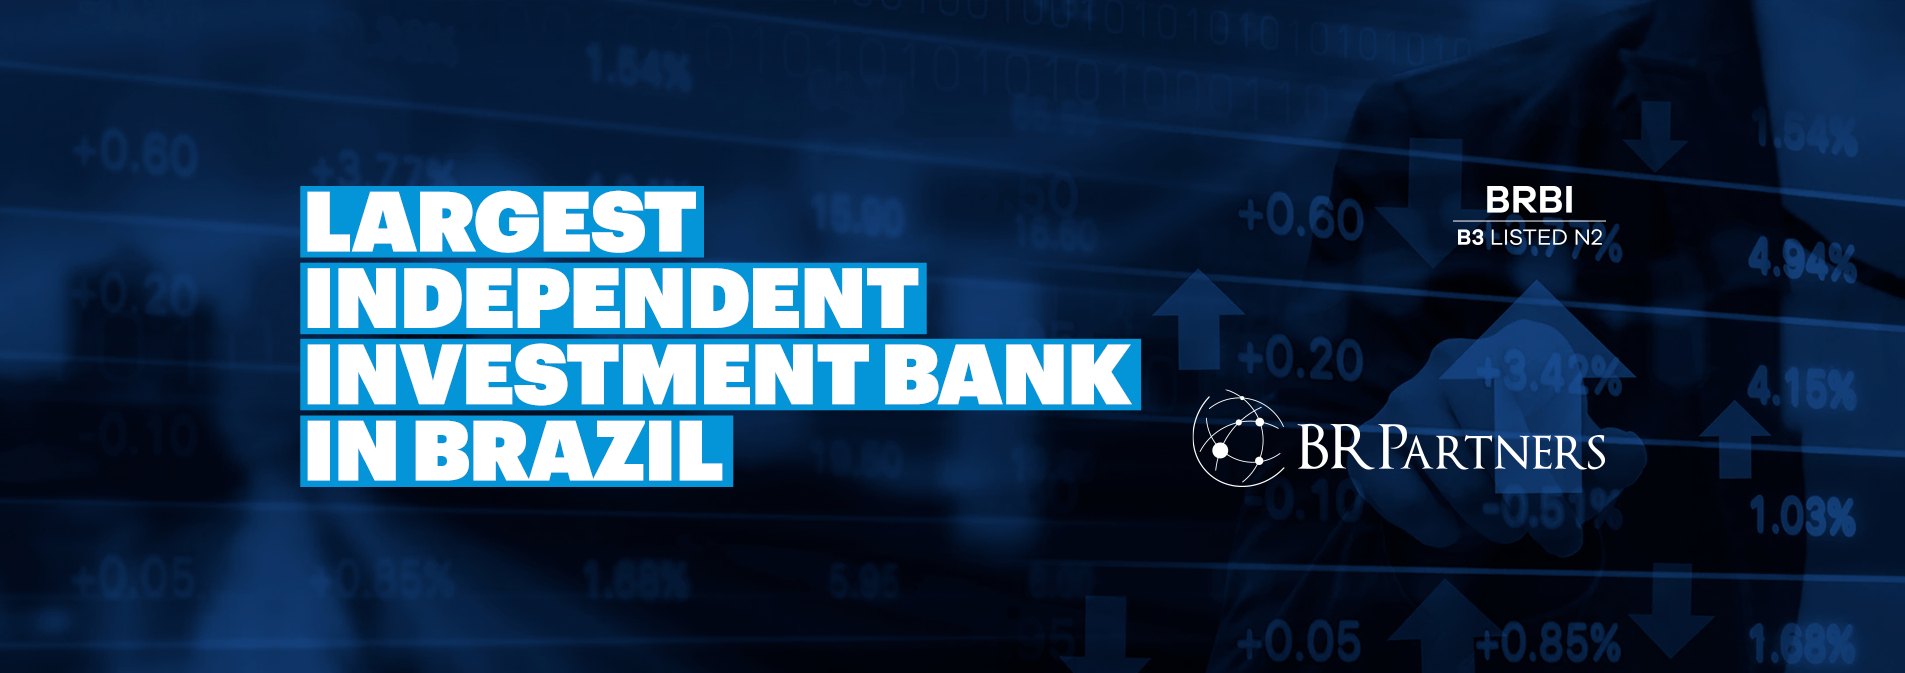 BR-Partners_Banner_Site_Banco_Investment_Bank_Independent